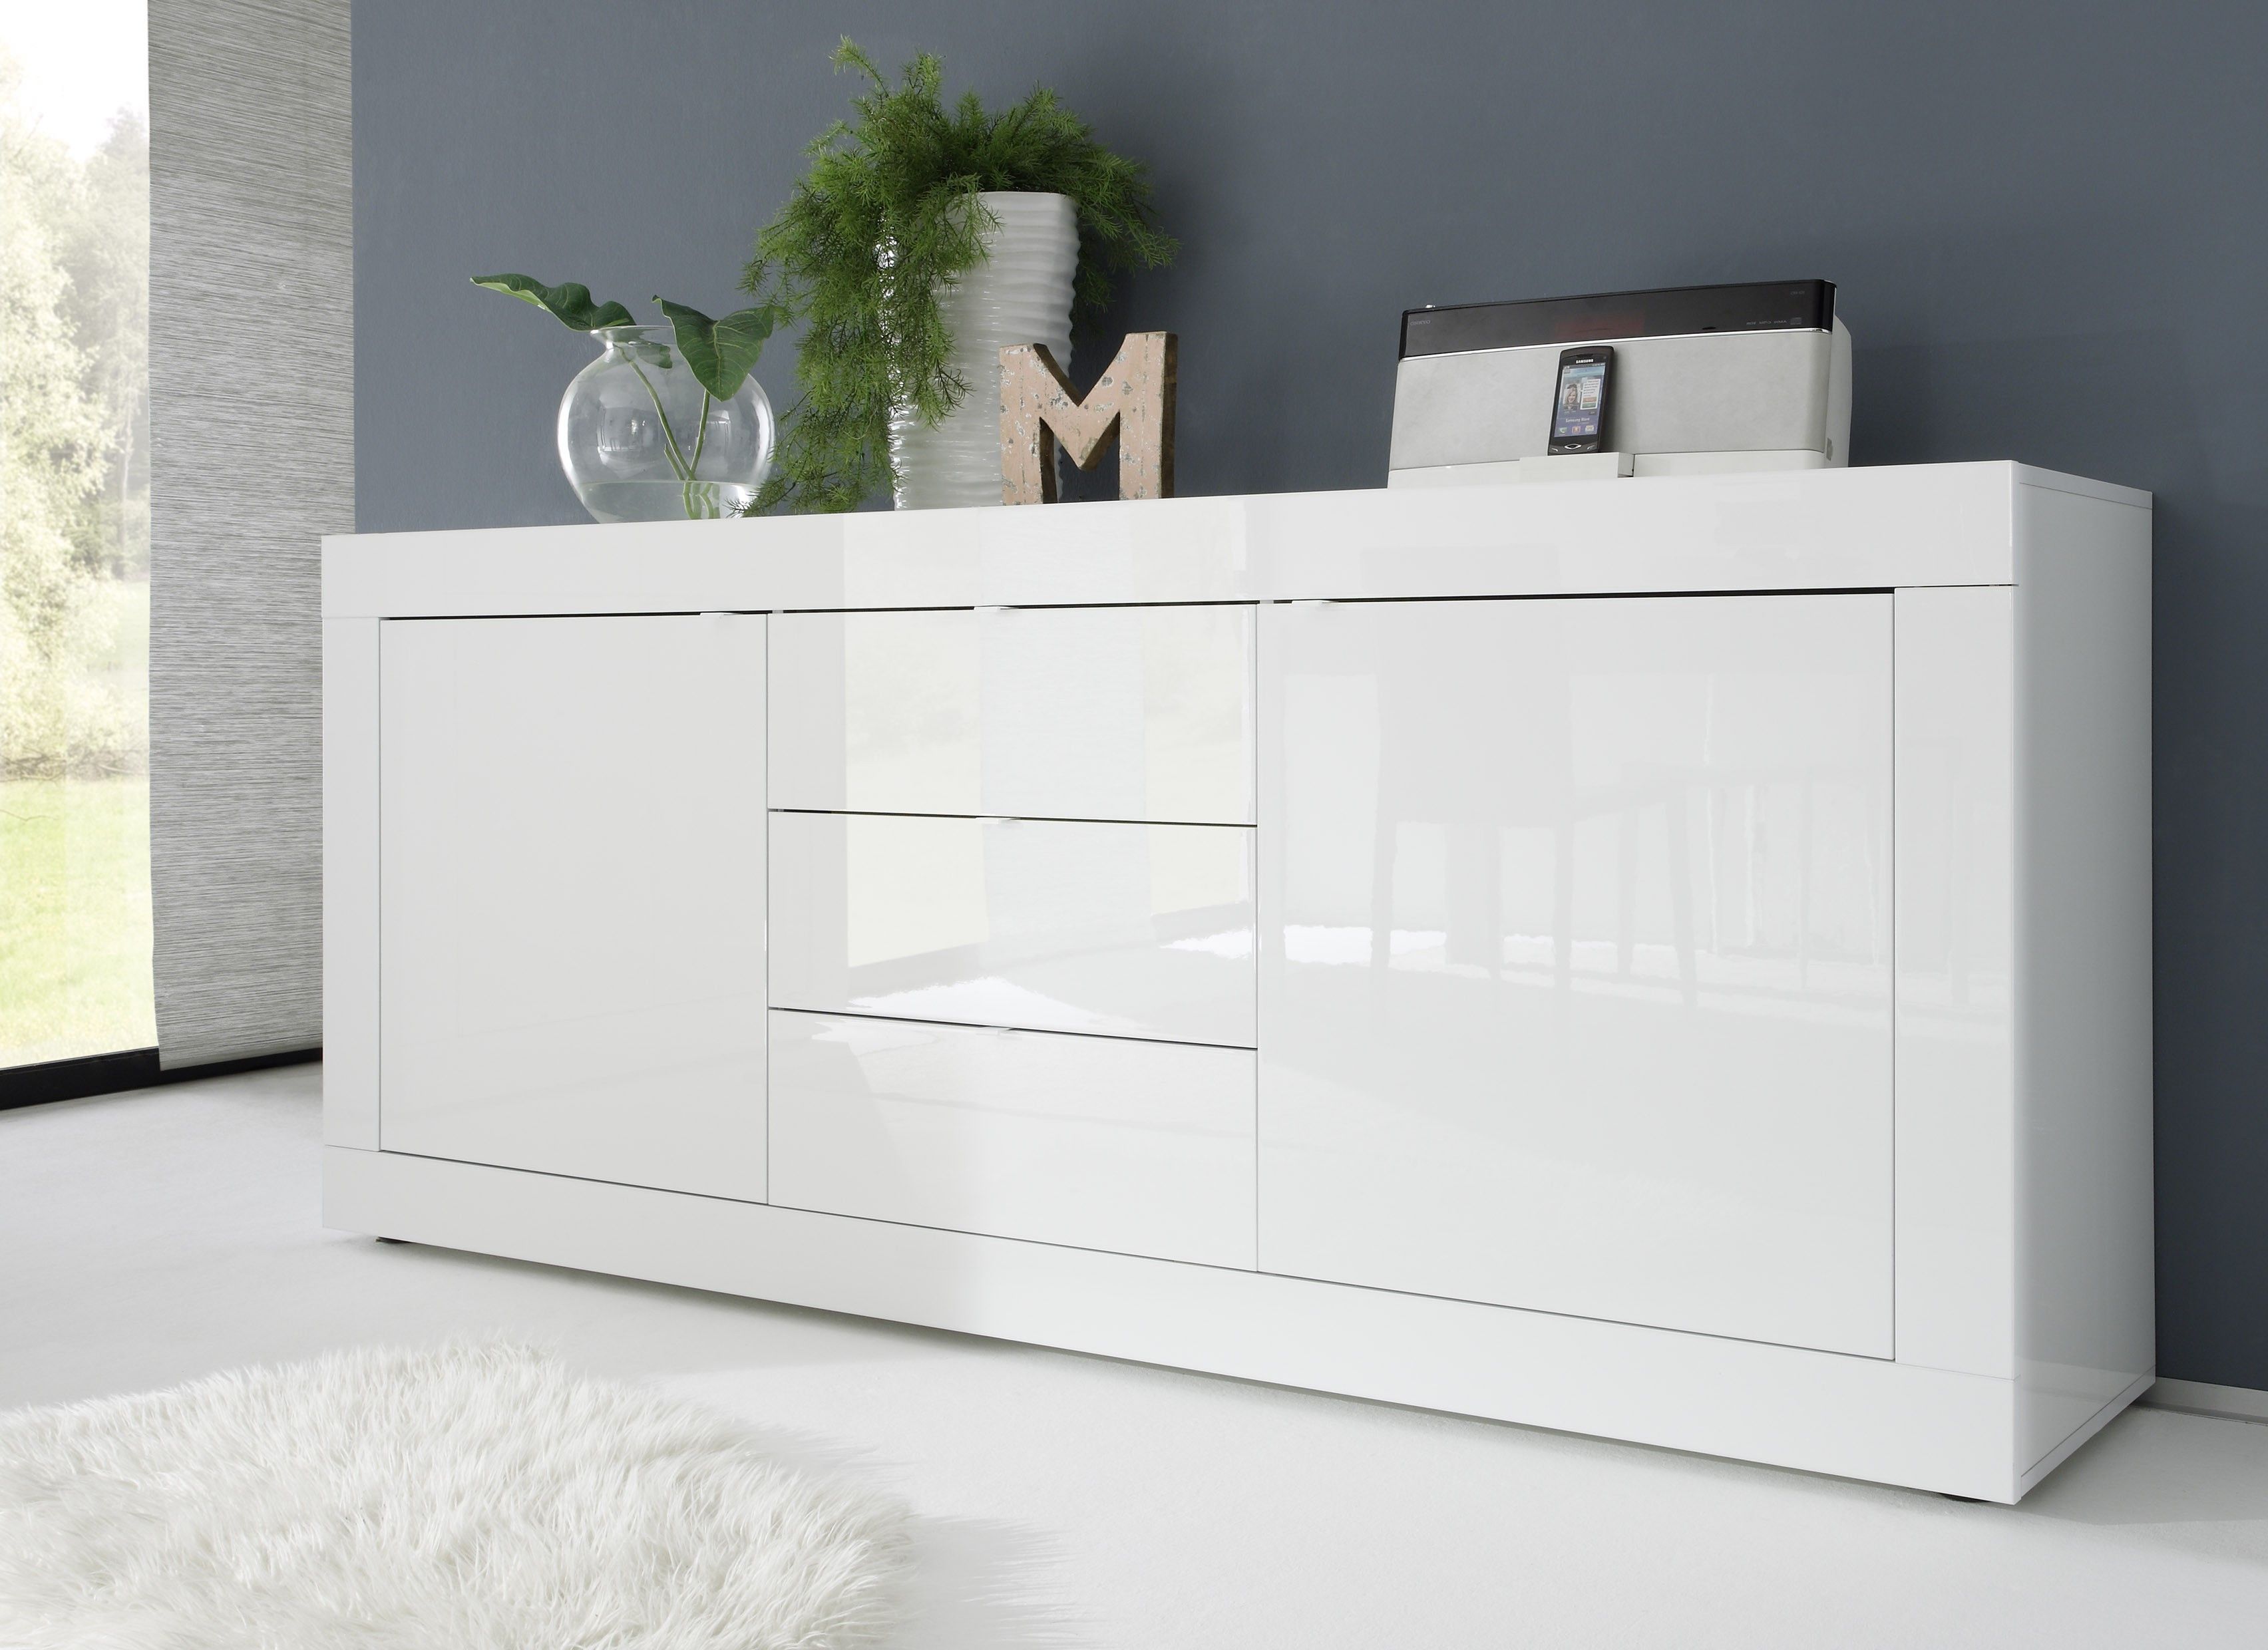 Basic Contemporary White Glossy Lacquer Dining Buffet | B Regarding Modern Lacquer 2 Door 3 Drawer Buffets (View 24 of 30)